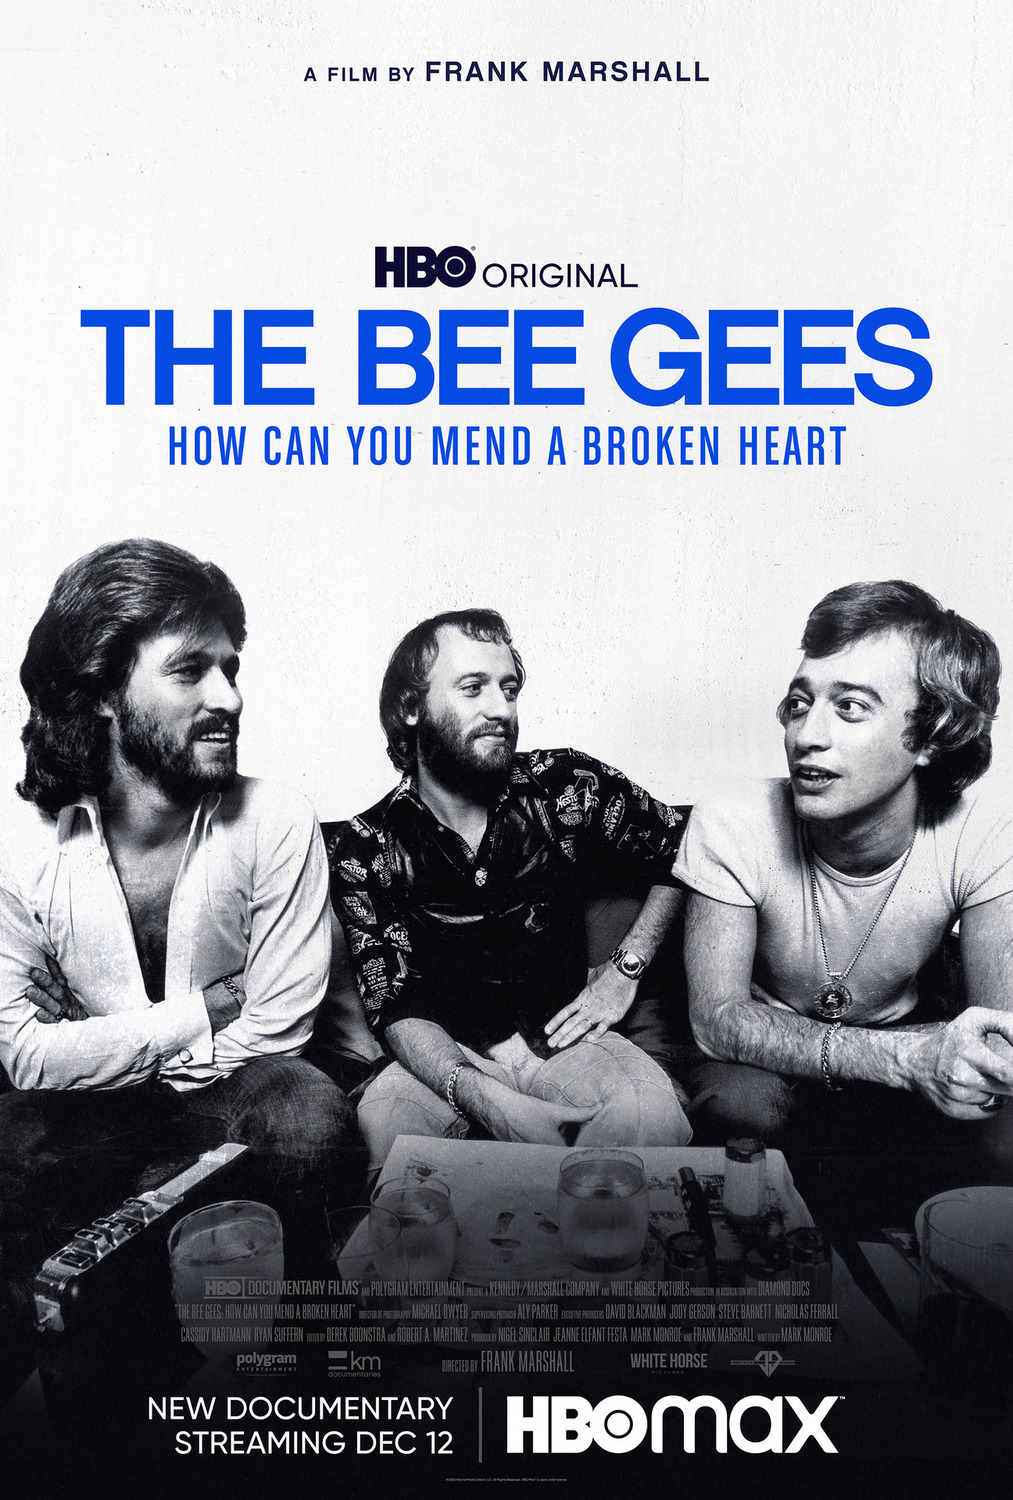 ȼ˹:޸ The.Bee.Gees.How.Can.You.Mend.a.Broken.Heart.2020.1080p.BluRay.AVC.DTS-HD.MA.5.1-FGT 33.34GB